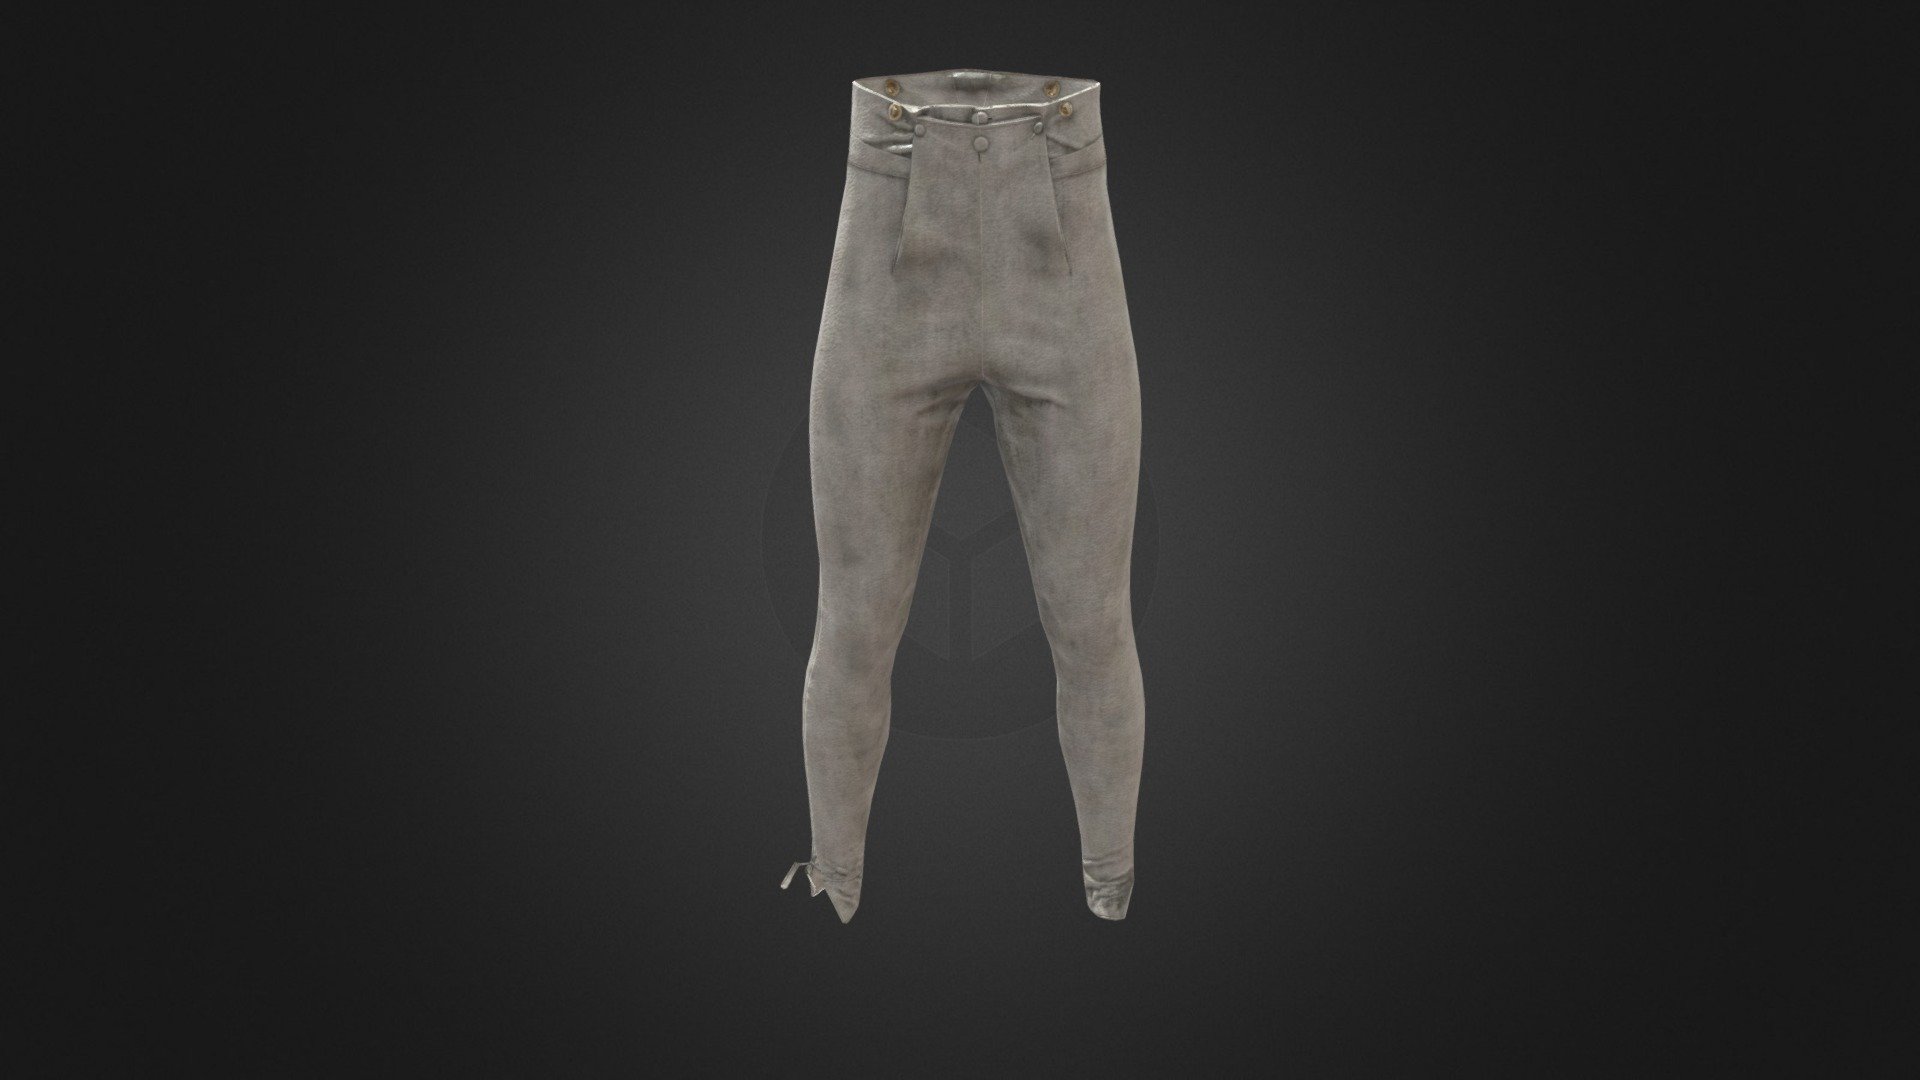 Historically accurate early 19th century lambskin pantaloons in an A-pose. These pantaloons fit tight around the legs so they can be tucked into boots and feature a half-fall front closure and brass suspender buttons. This specific pair is modeled after an extant pair of a First Empire rifle officer's uniform 3d model